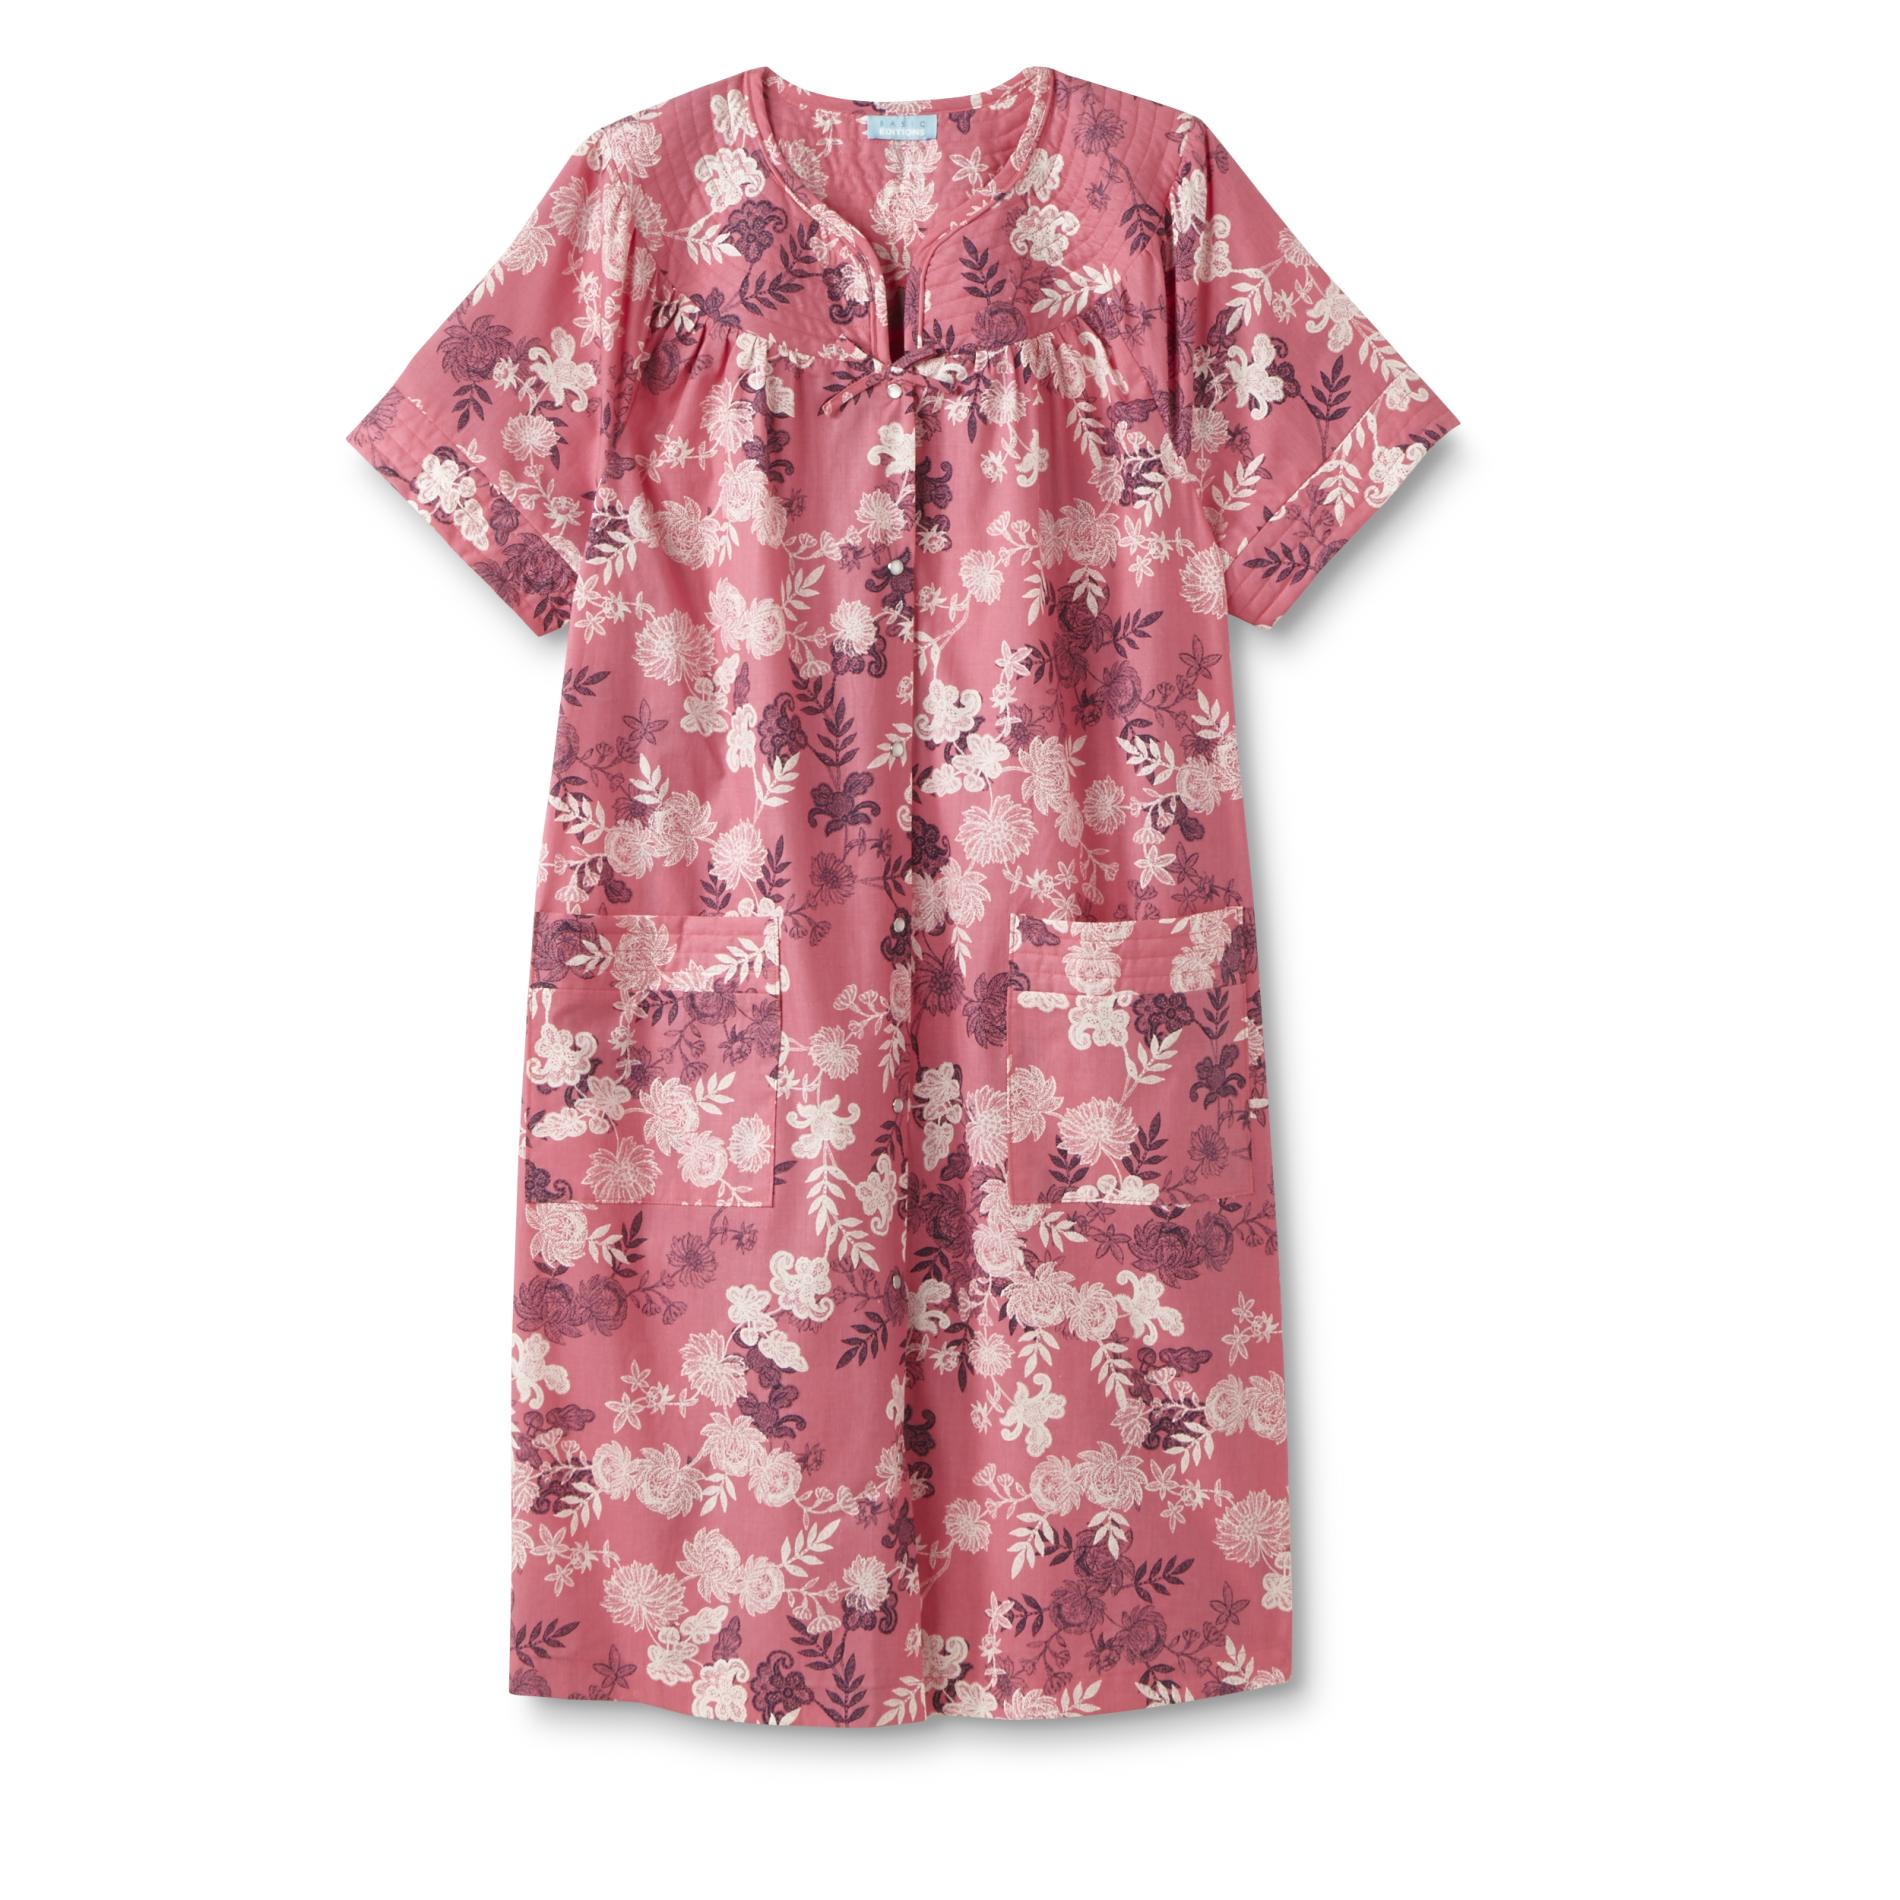 Basic Editions Women's Plus Duster Robe - Floral